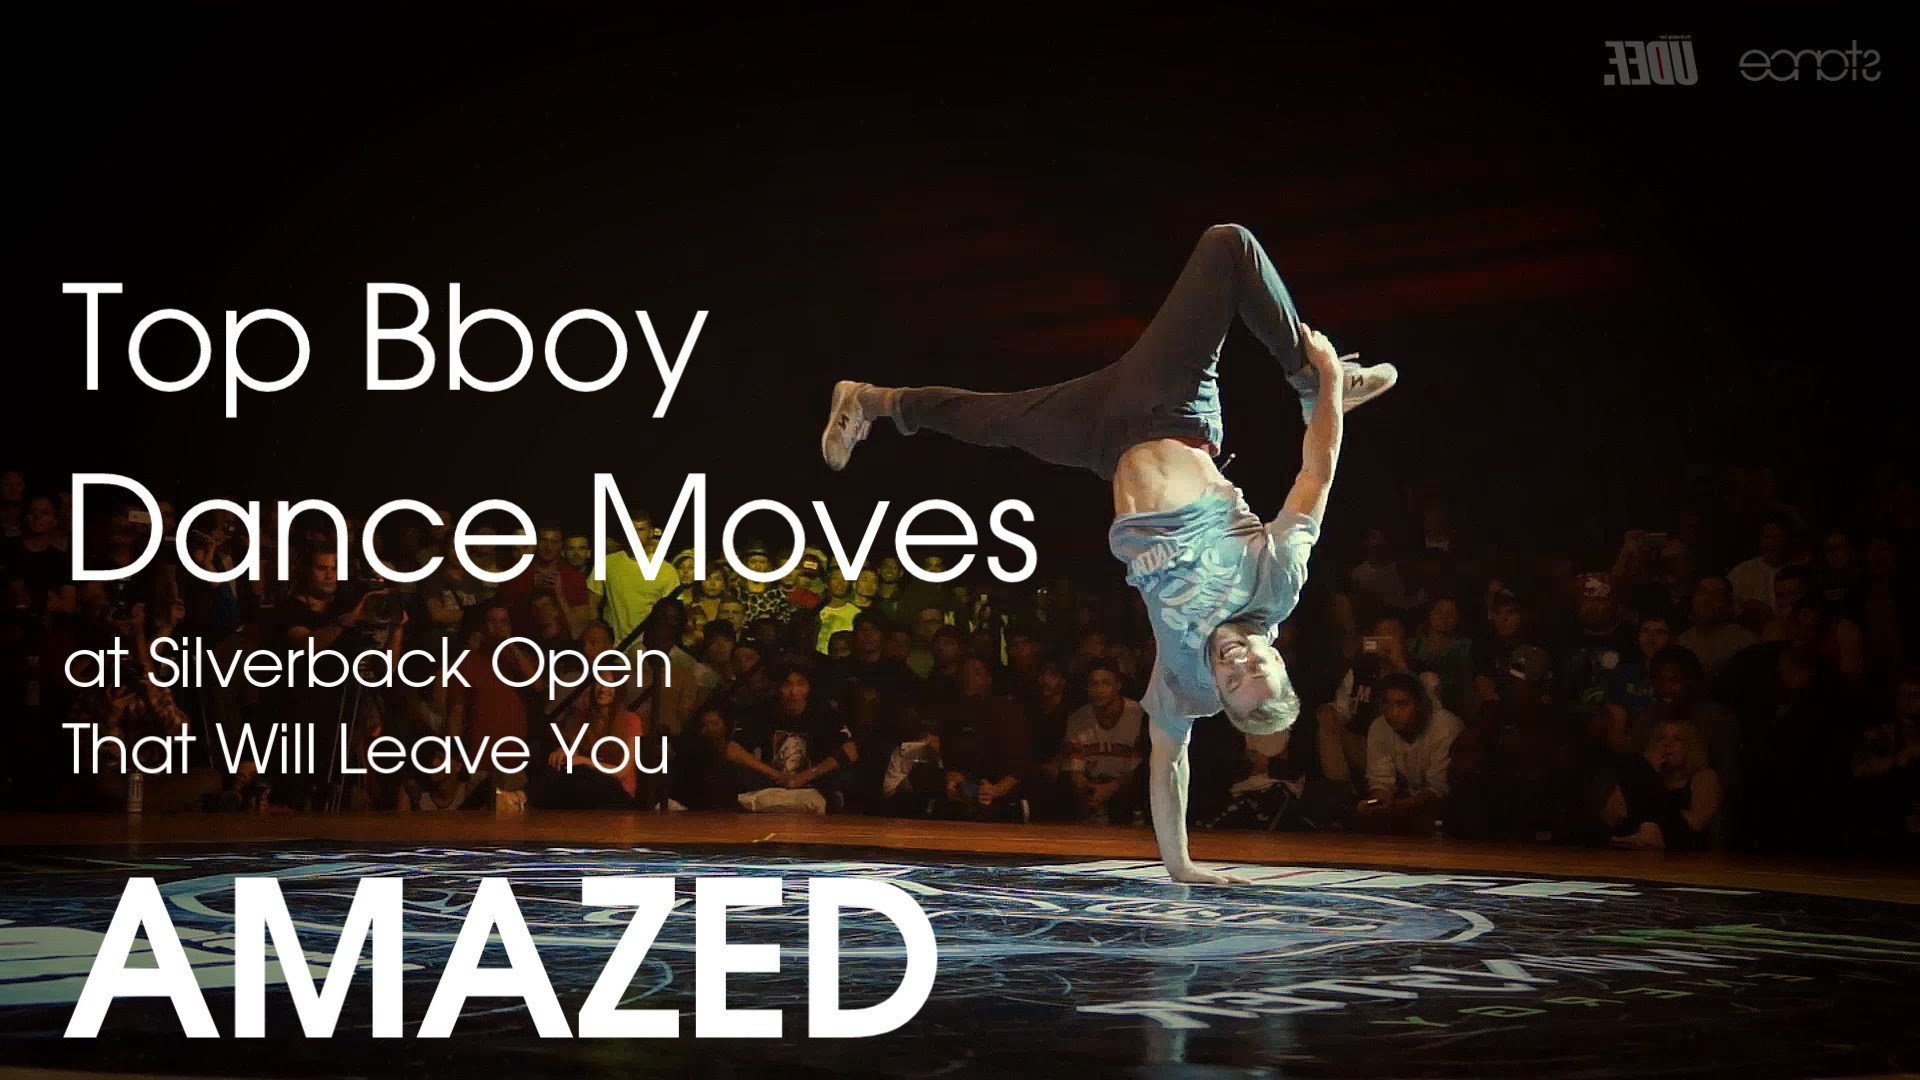 1920x1080 Top Bboy Dance Moves at Silverback Open That Will Leave You AMAZED